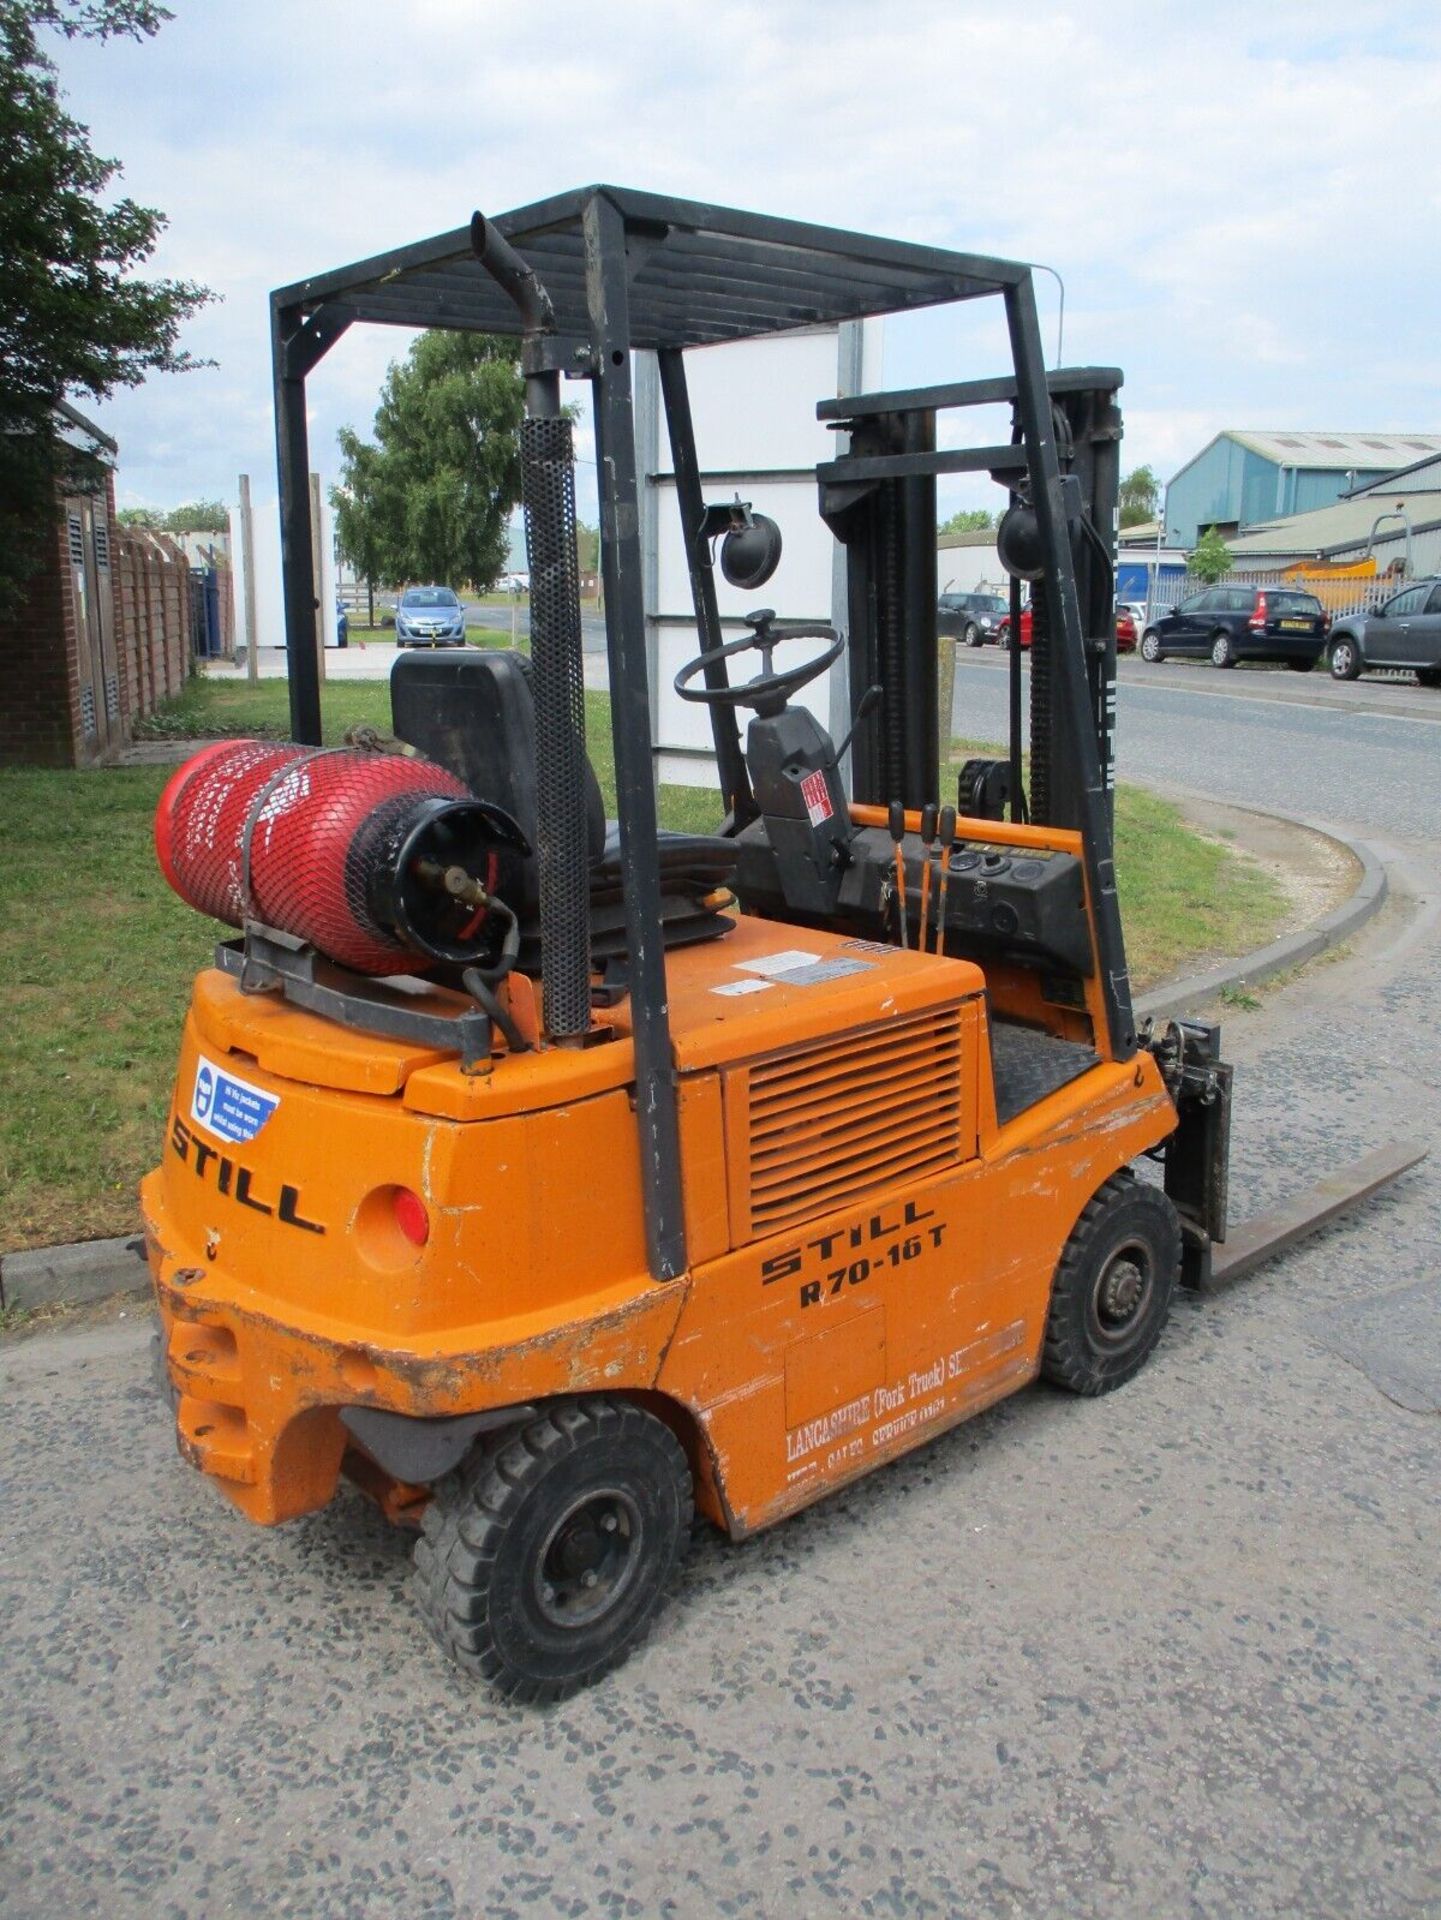 STILL R70-16T FORK LIFT FORKLIFT TRUCK STACKER CONTAINER SPEC TRIPLE MAST - Image 4 of 12